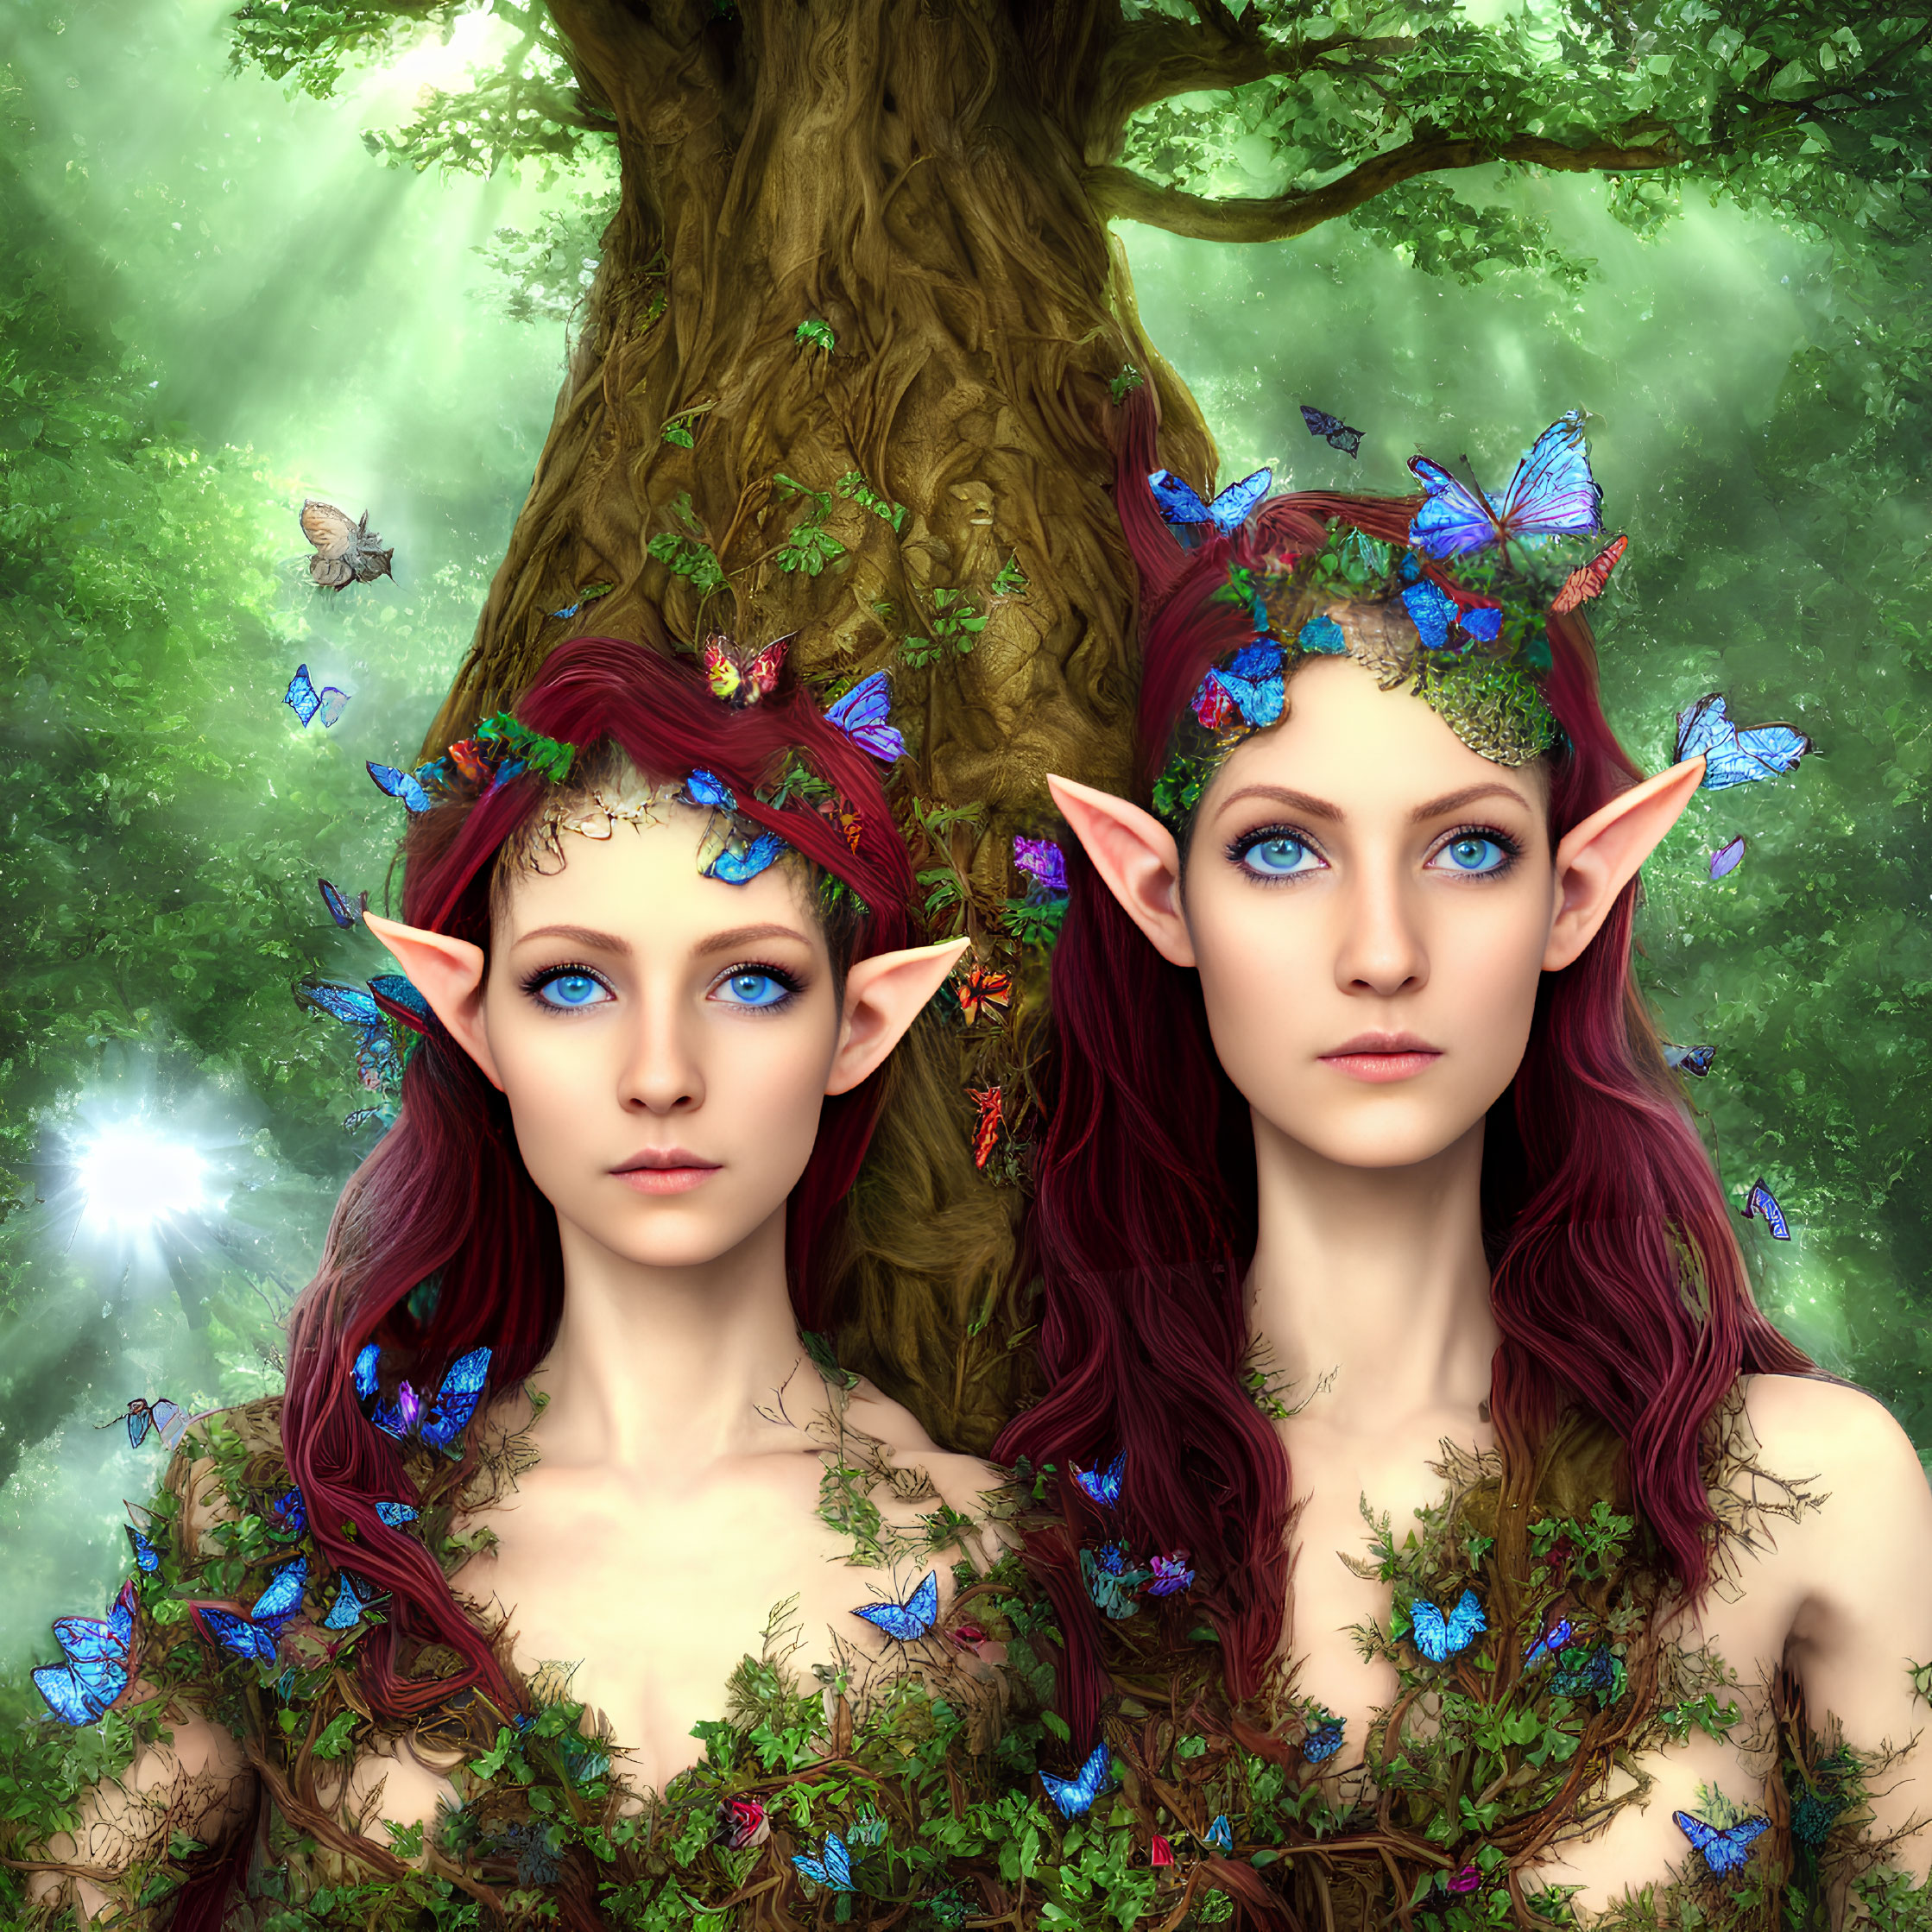 Fantasy elves with pointed ears in floral crowns among butterflies